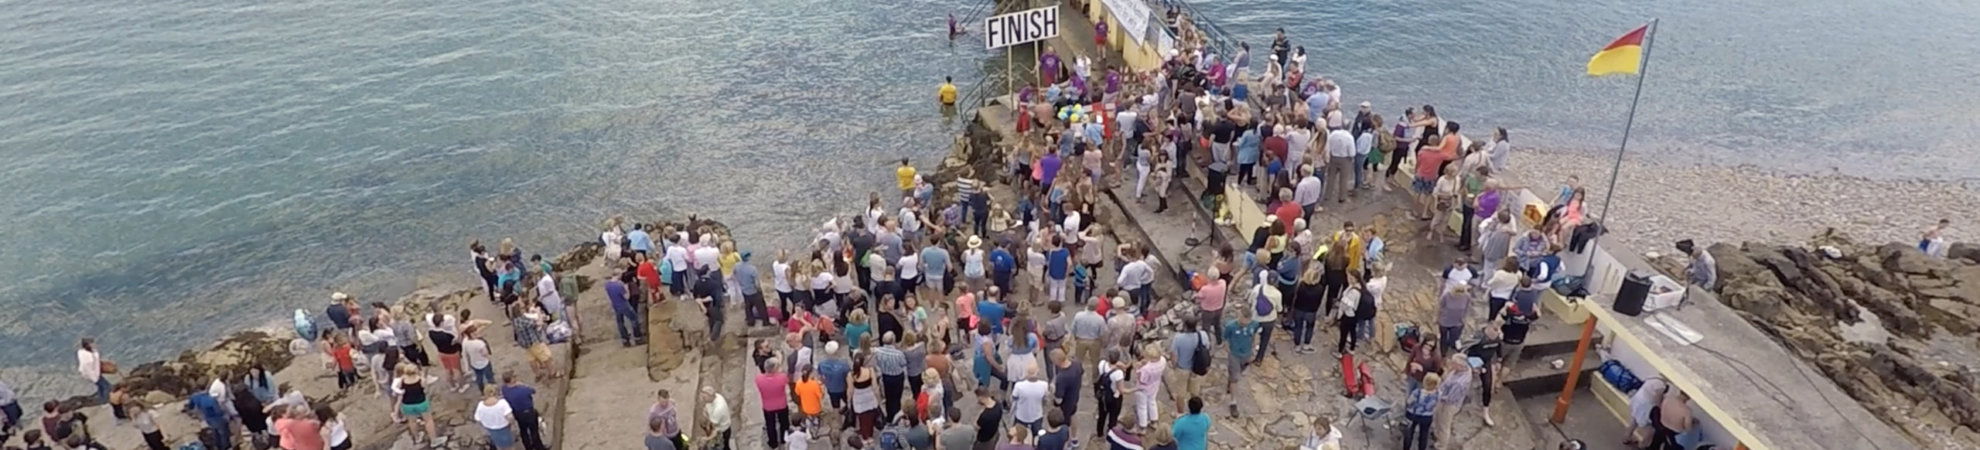 Swimmers turn out in their droves to take on the 13km swim across Galway Bay, for the annual Frances Thornton Memorial Galway Bay Swim.